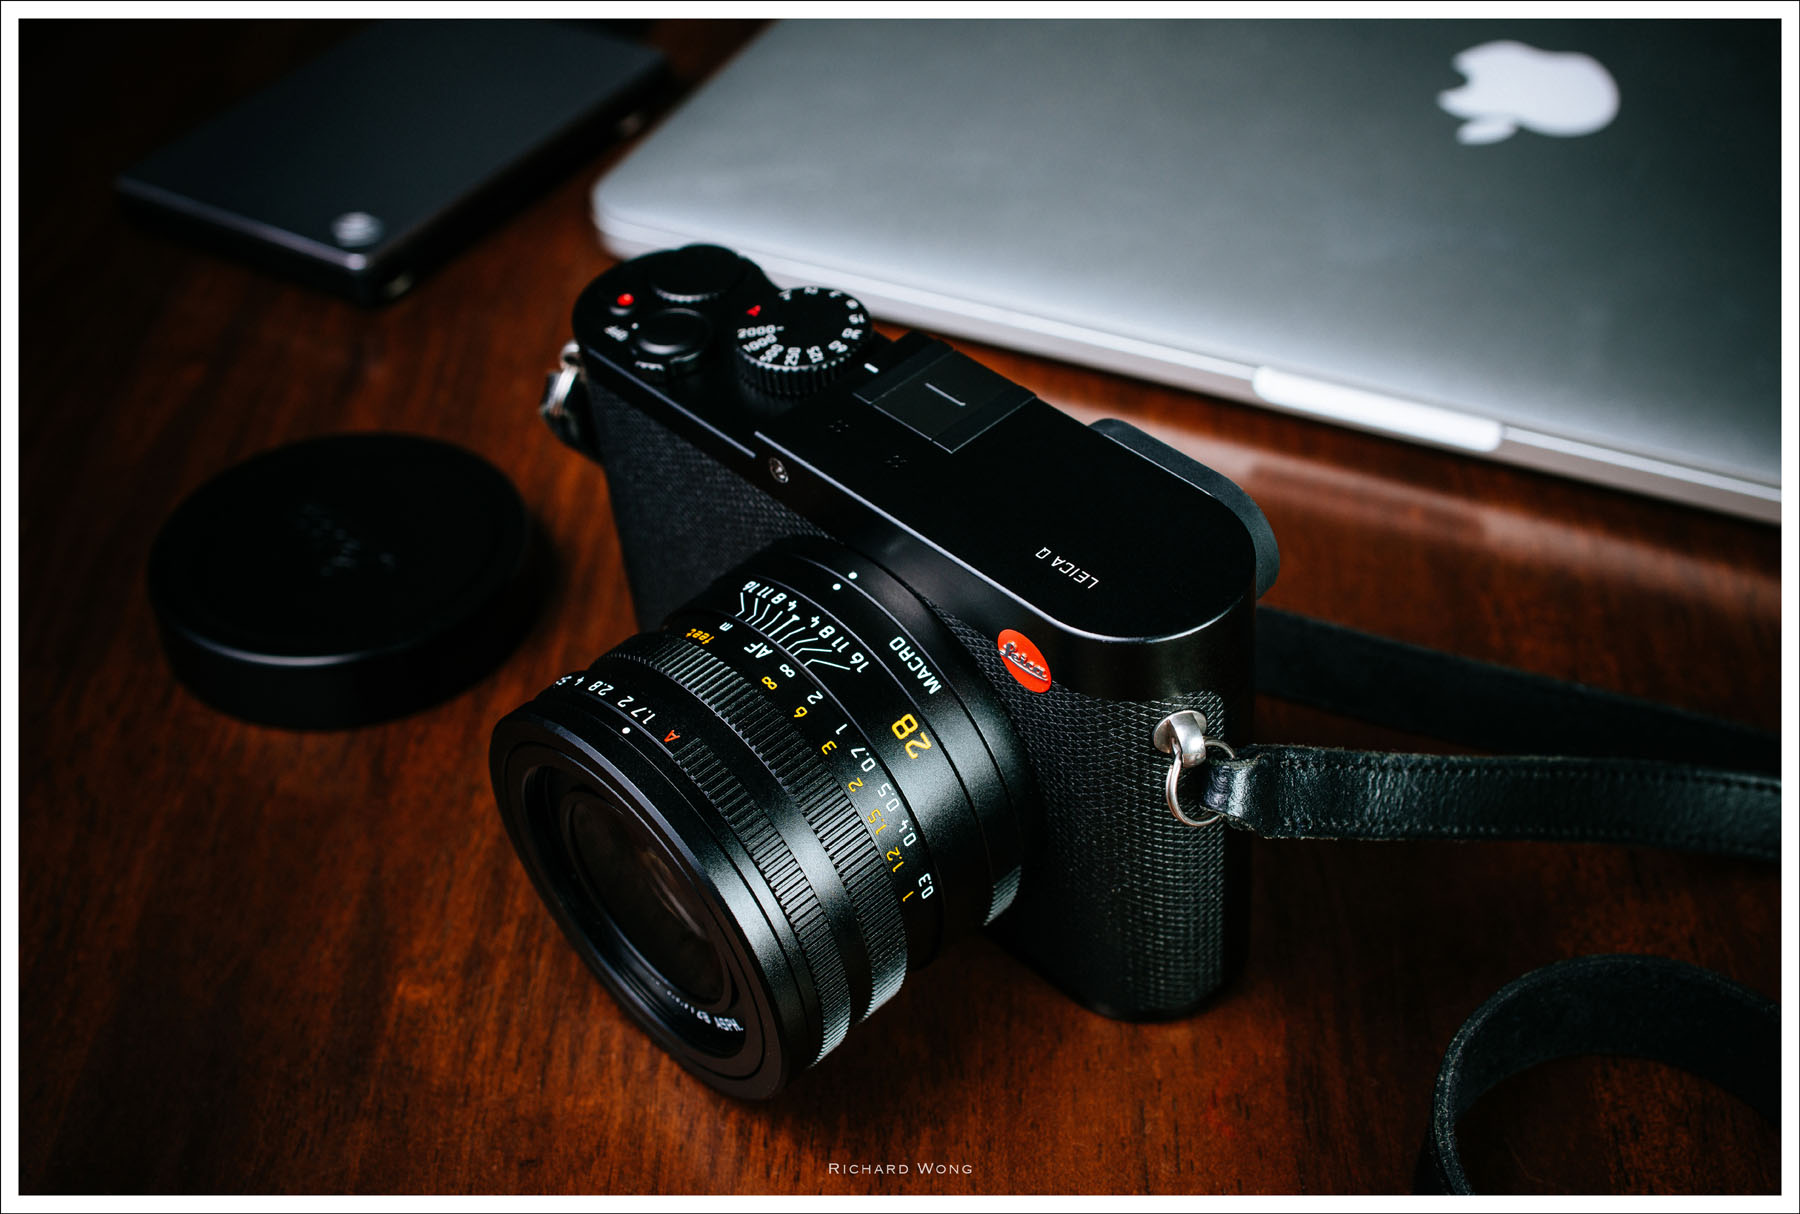 Leica Q (Type 116) Review – Review By Richard